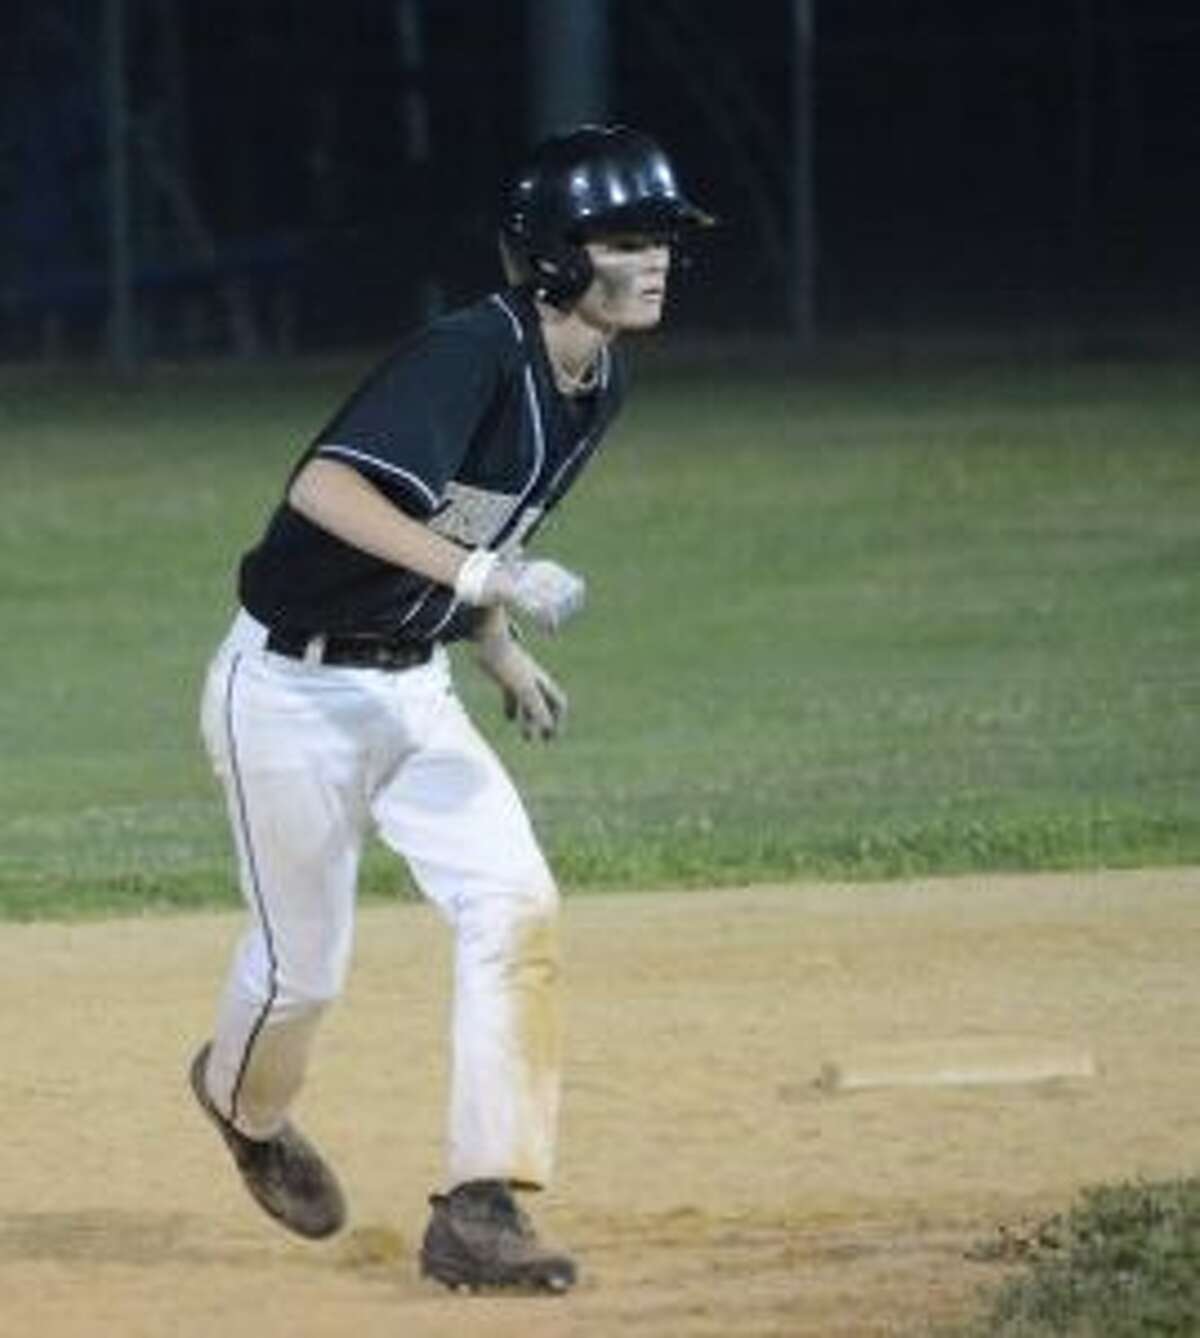 Bryan Kraus reached in the seventh inning, stole second, and scored on Johnny Bova's single to send Trumbull on to the New England Regionals.